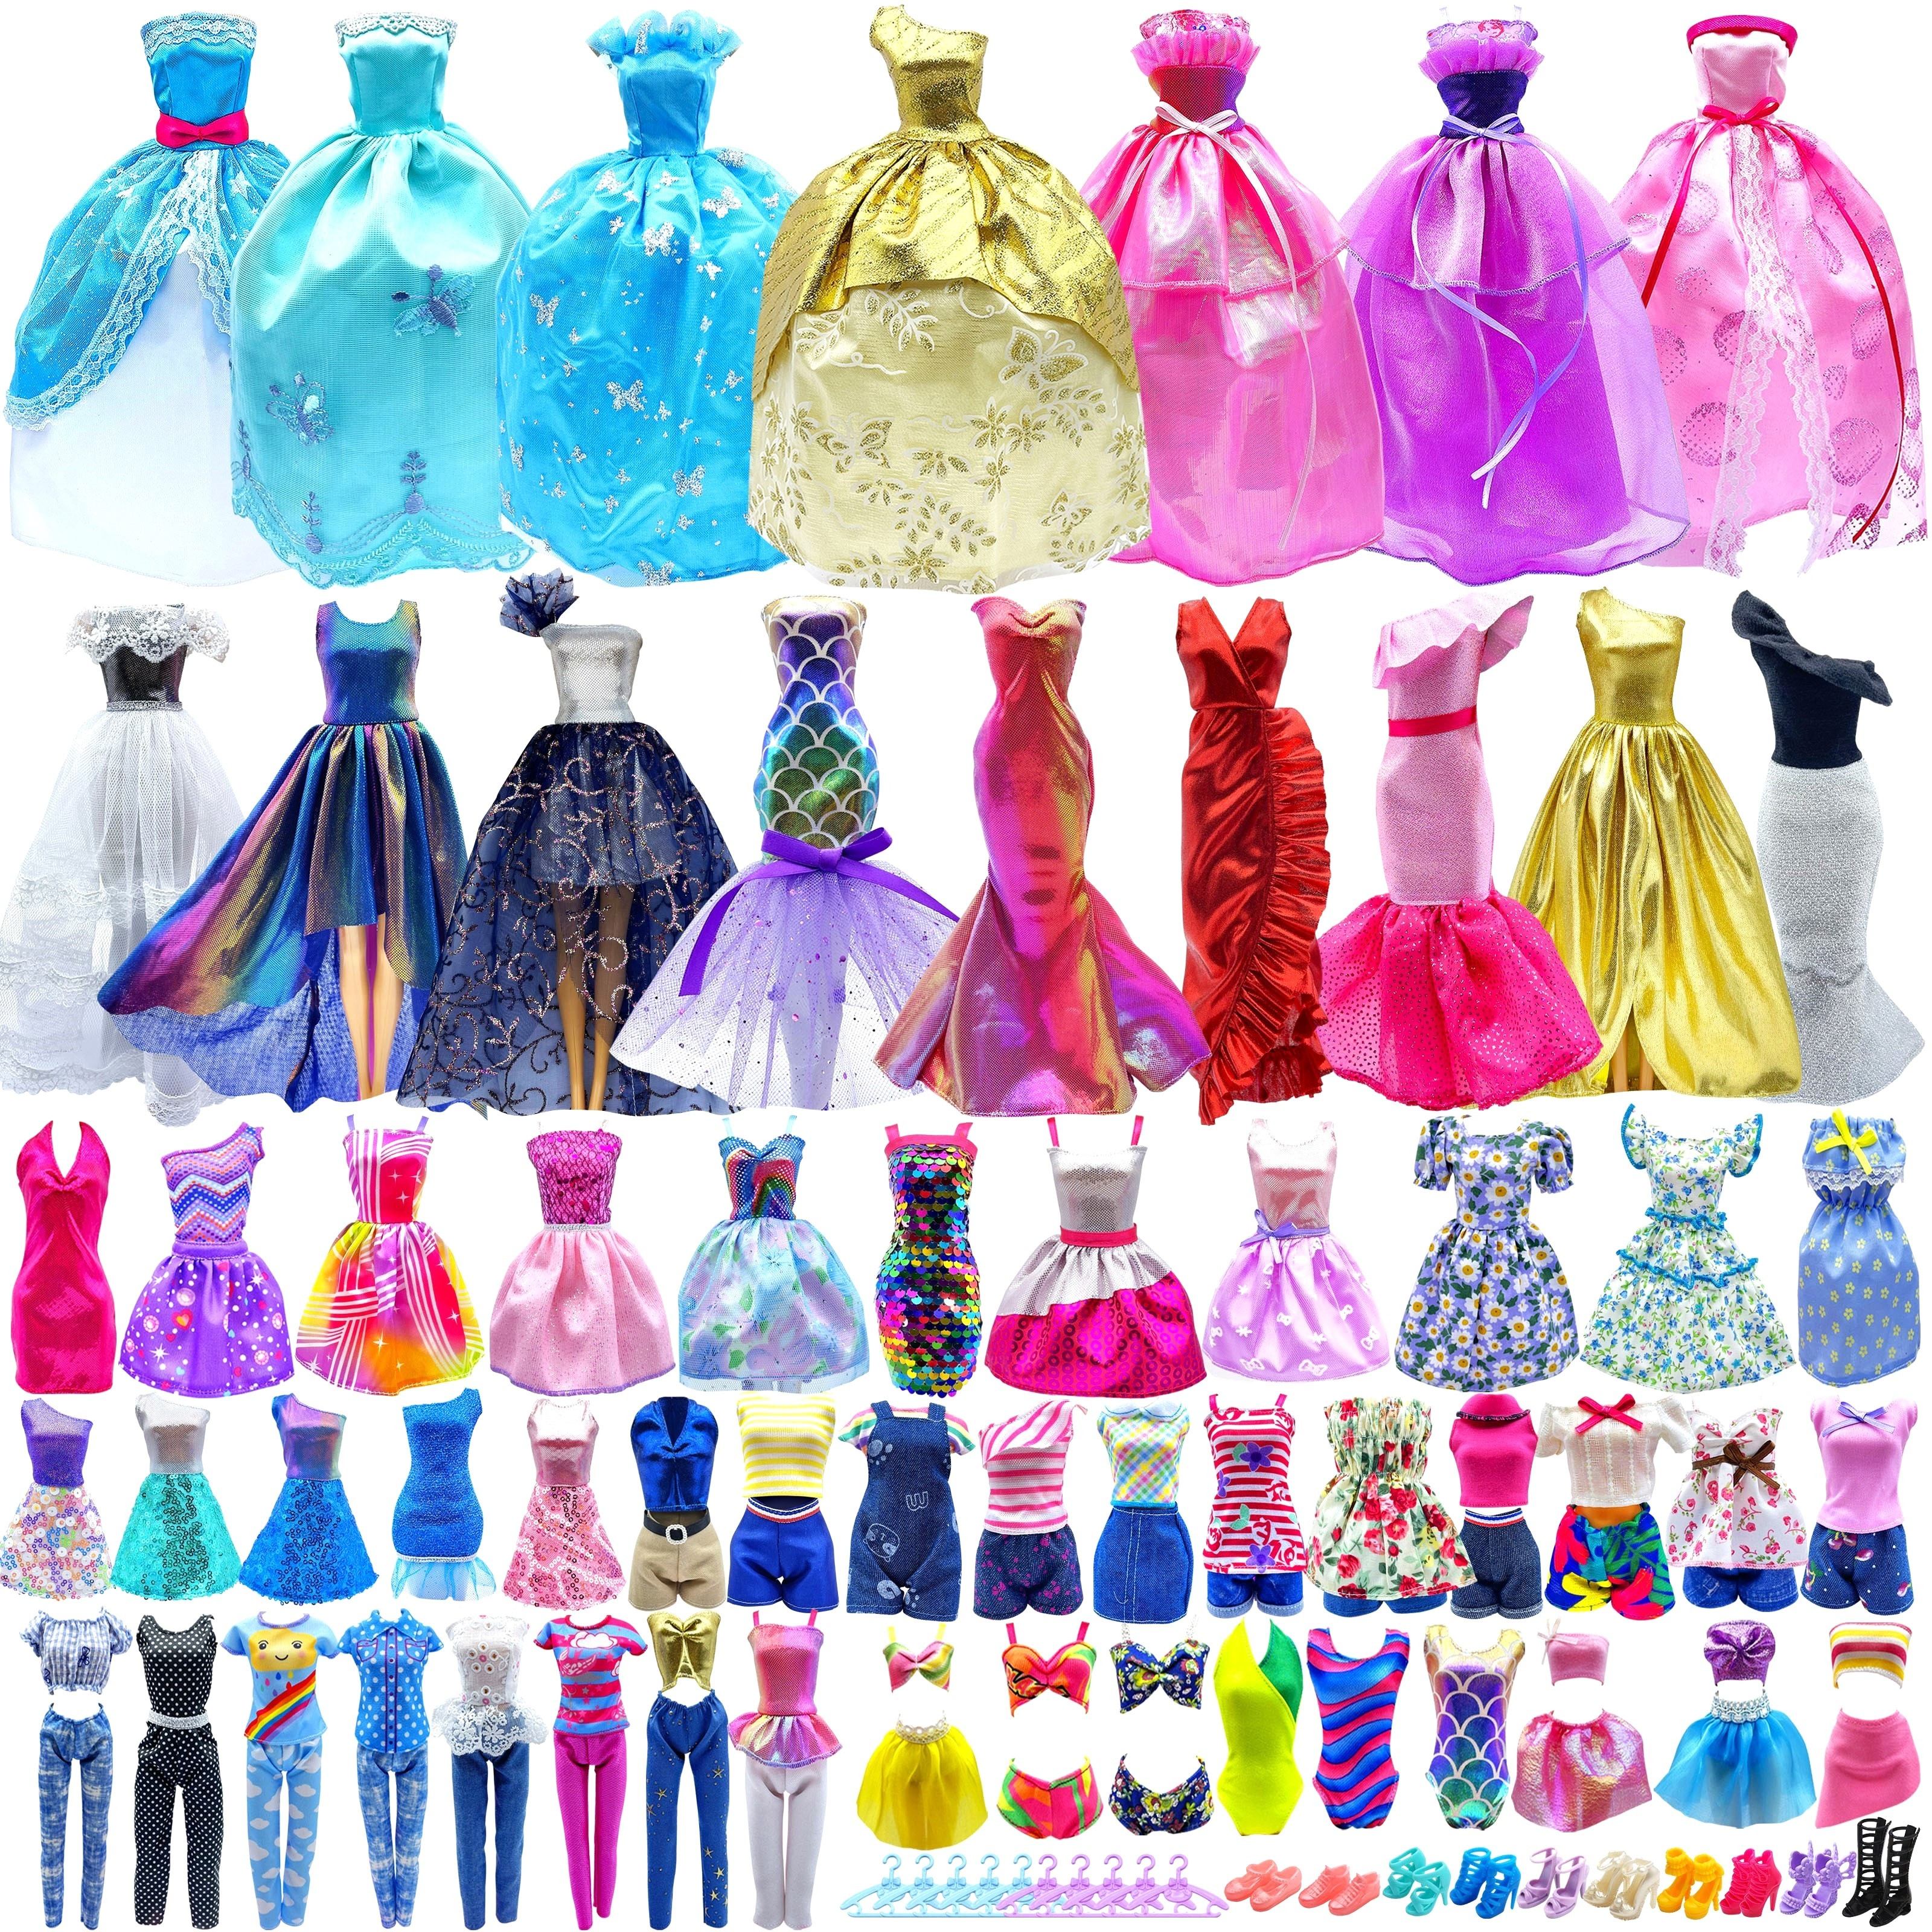 10 Pcs Doll Clothes for Barbie 11.5 inch Doll Clothes Handmade Casual Wear Including 5 Fashion Outfits Tops and Pants 5 Fashion Dresses in Random